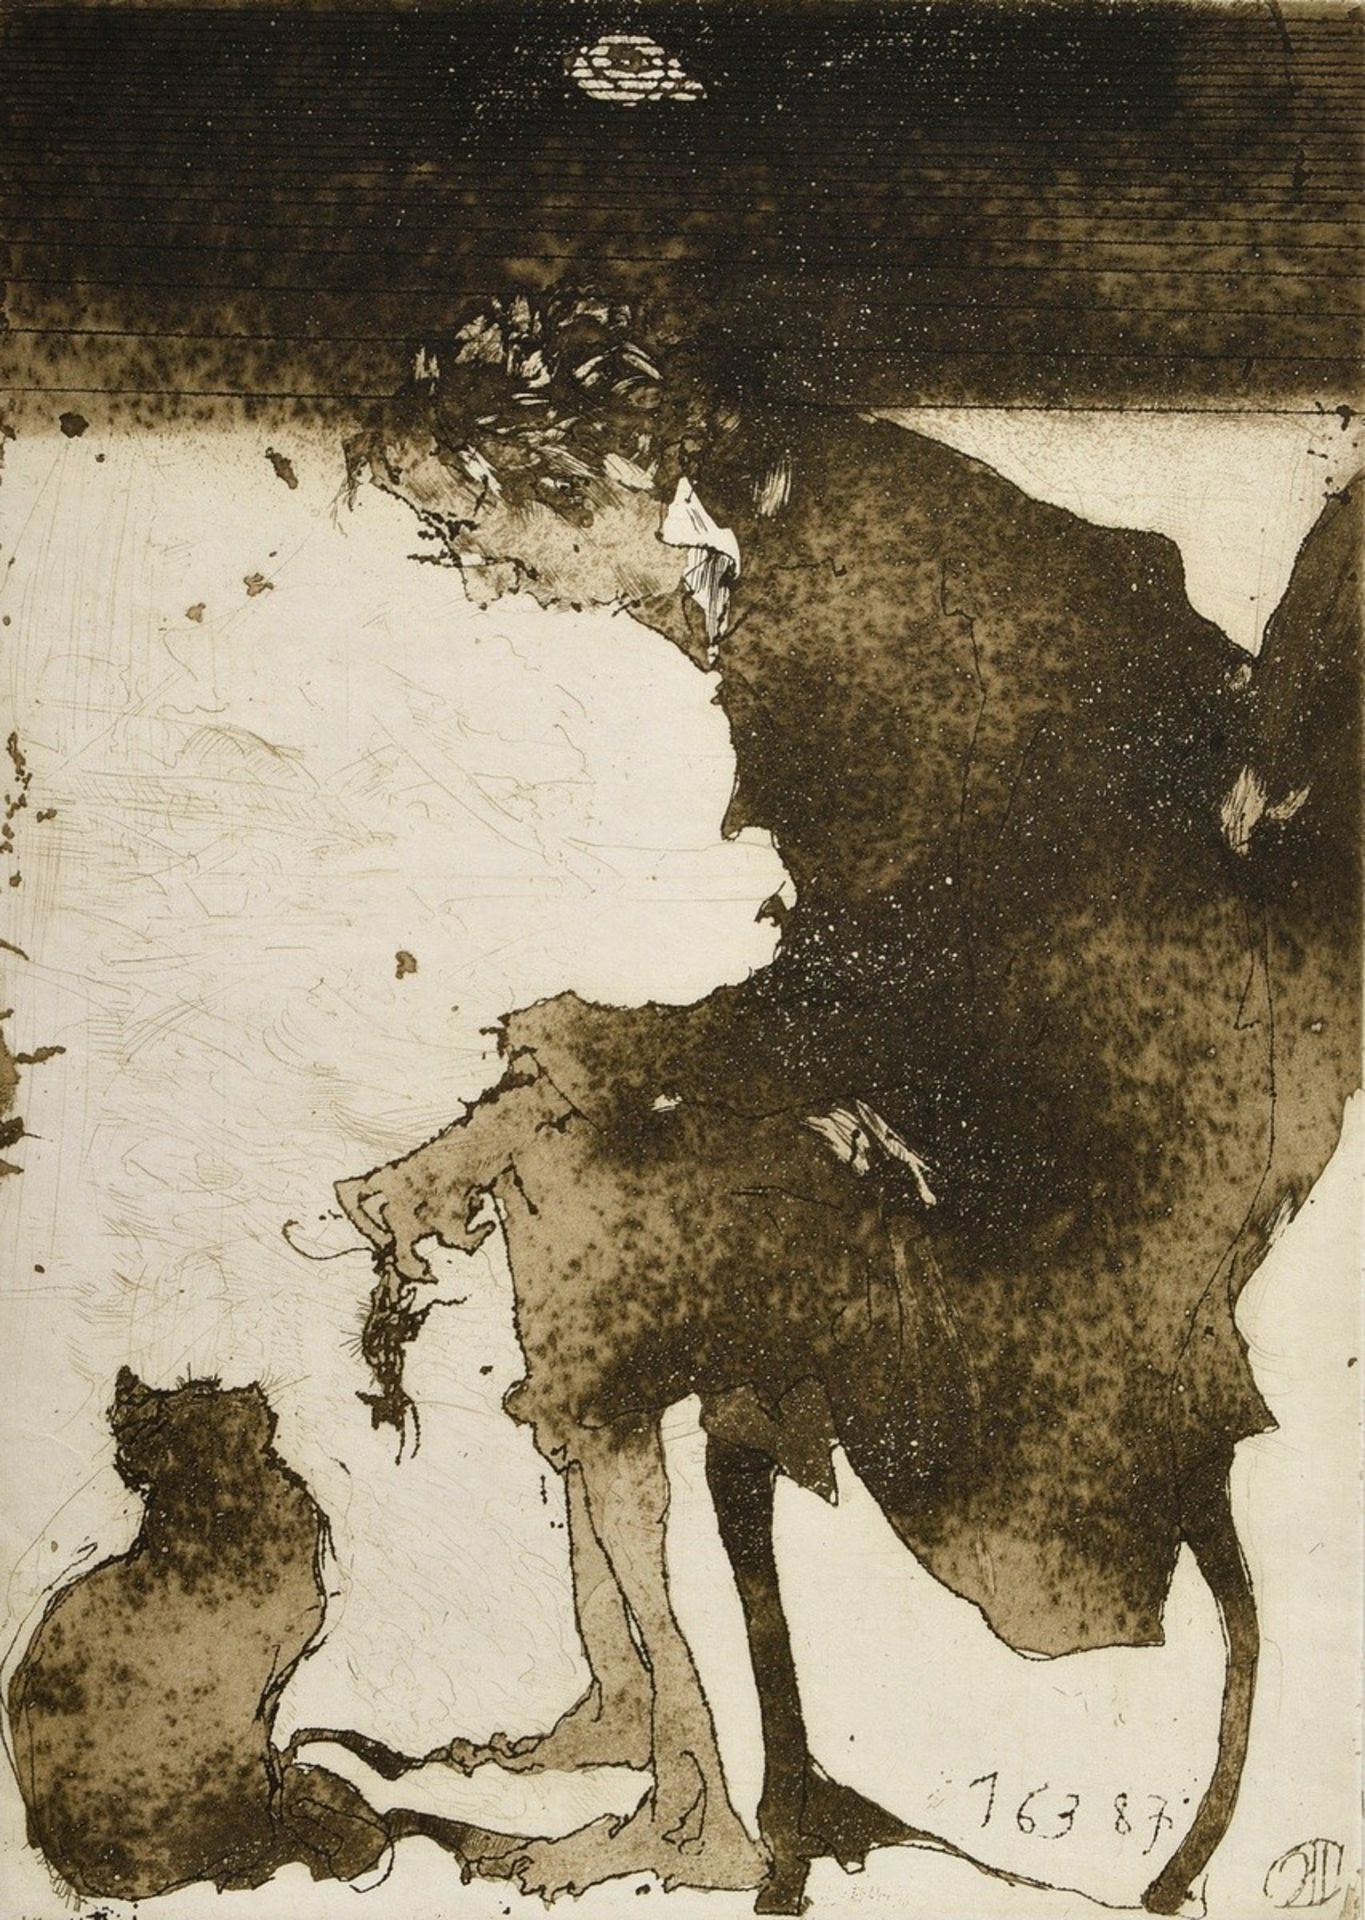 Janssen, Horst (1929-1995) "Morgen-Lydia (Self with cat)" 1987, etching, Griffelkunst, sign. lower 